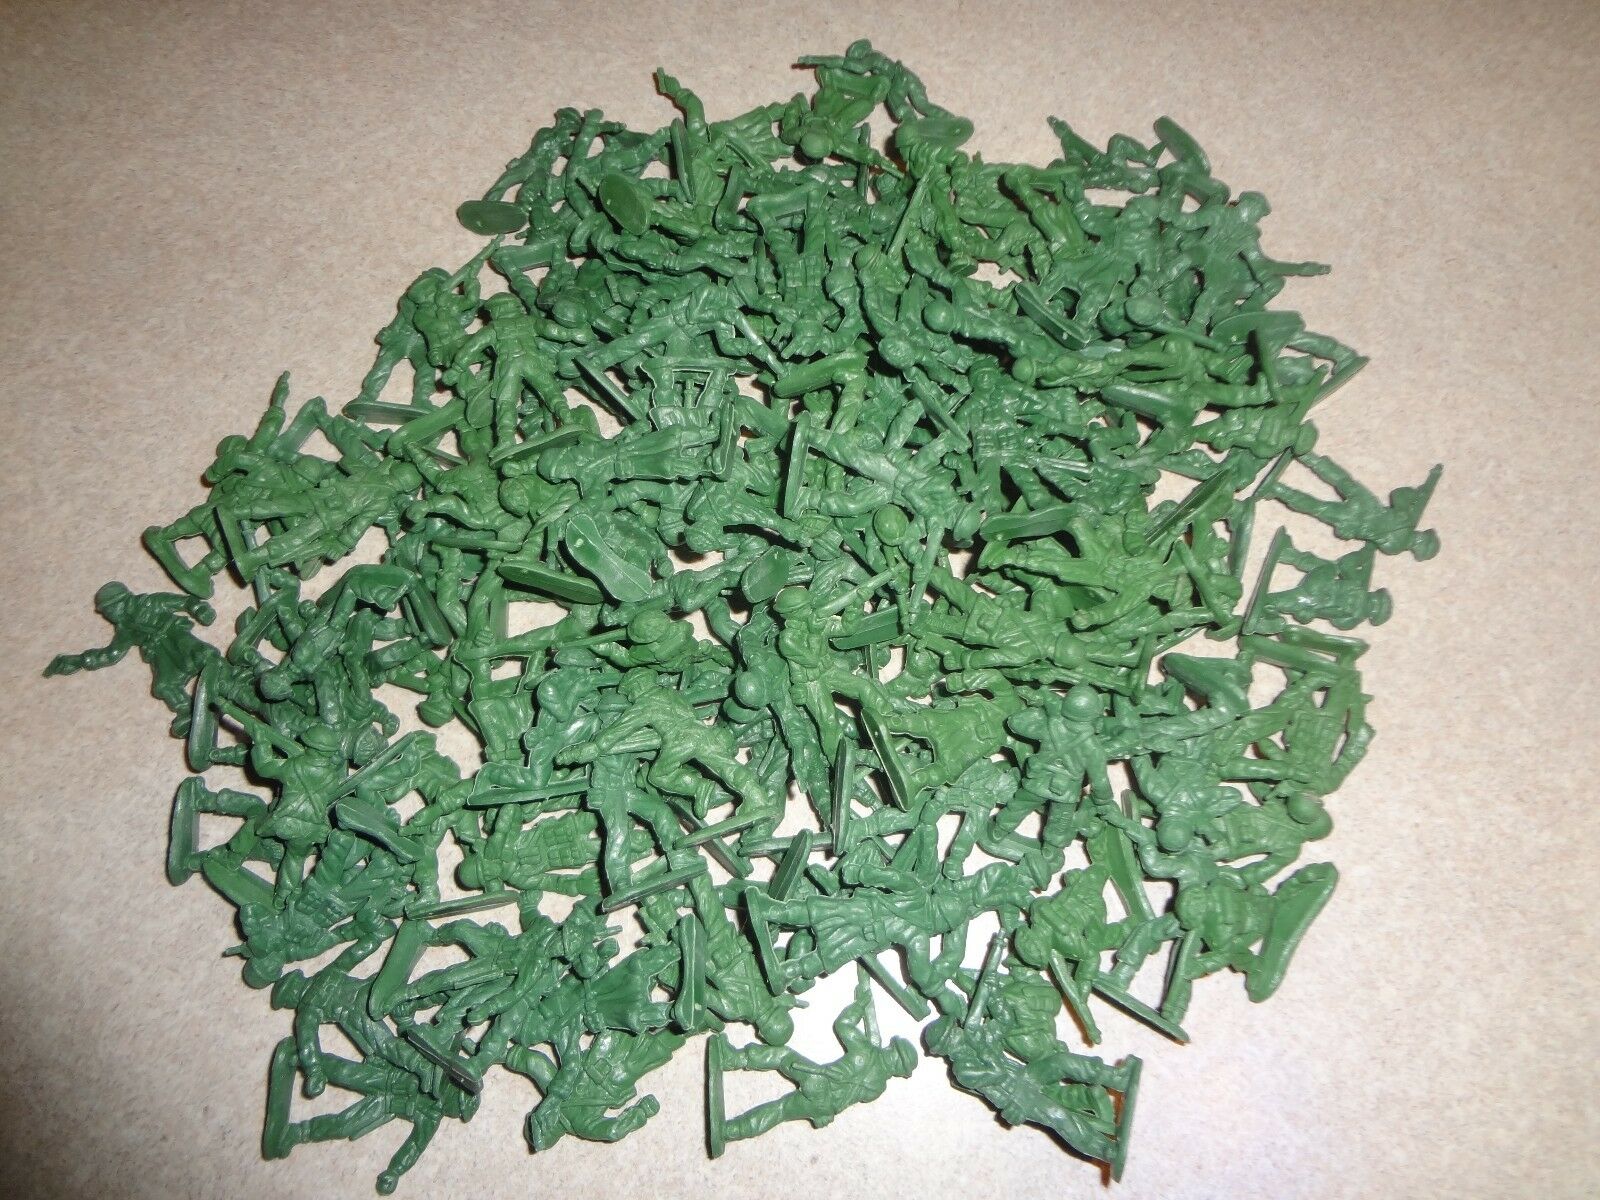 Lot Of 144 Green Plastic Mini Army Men 1" Inch Bulk Action Figures Toy Soldiers